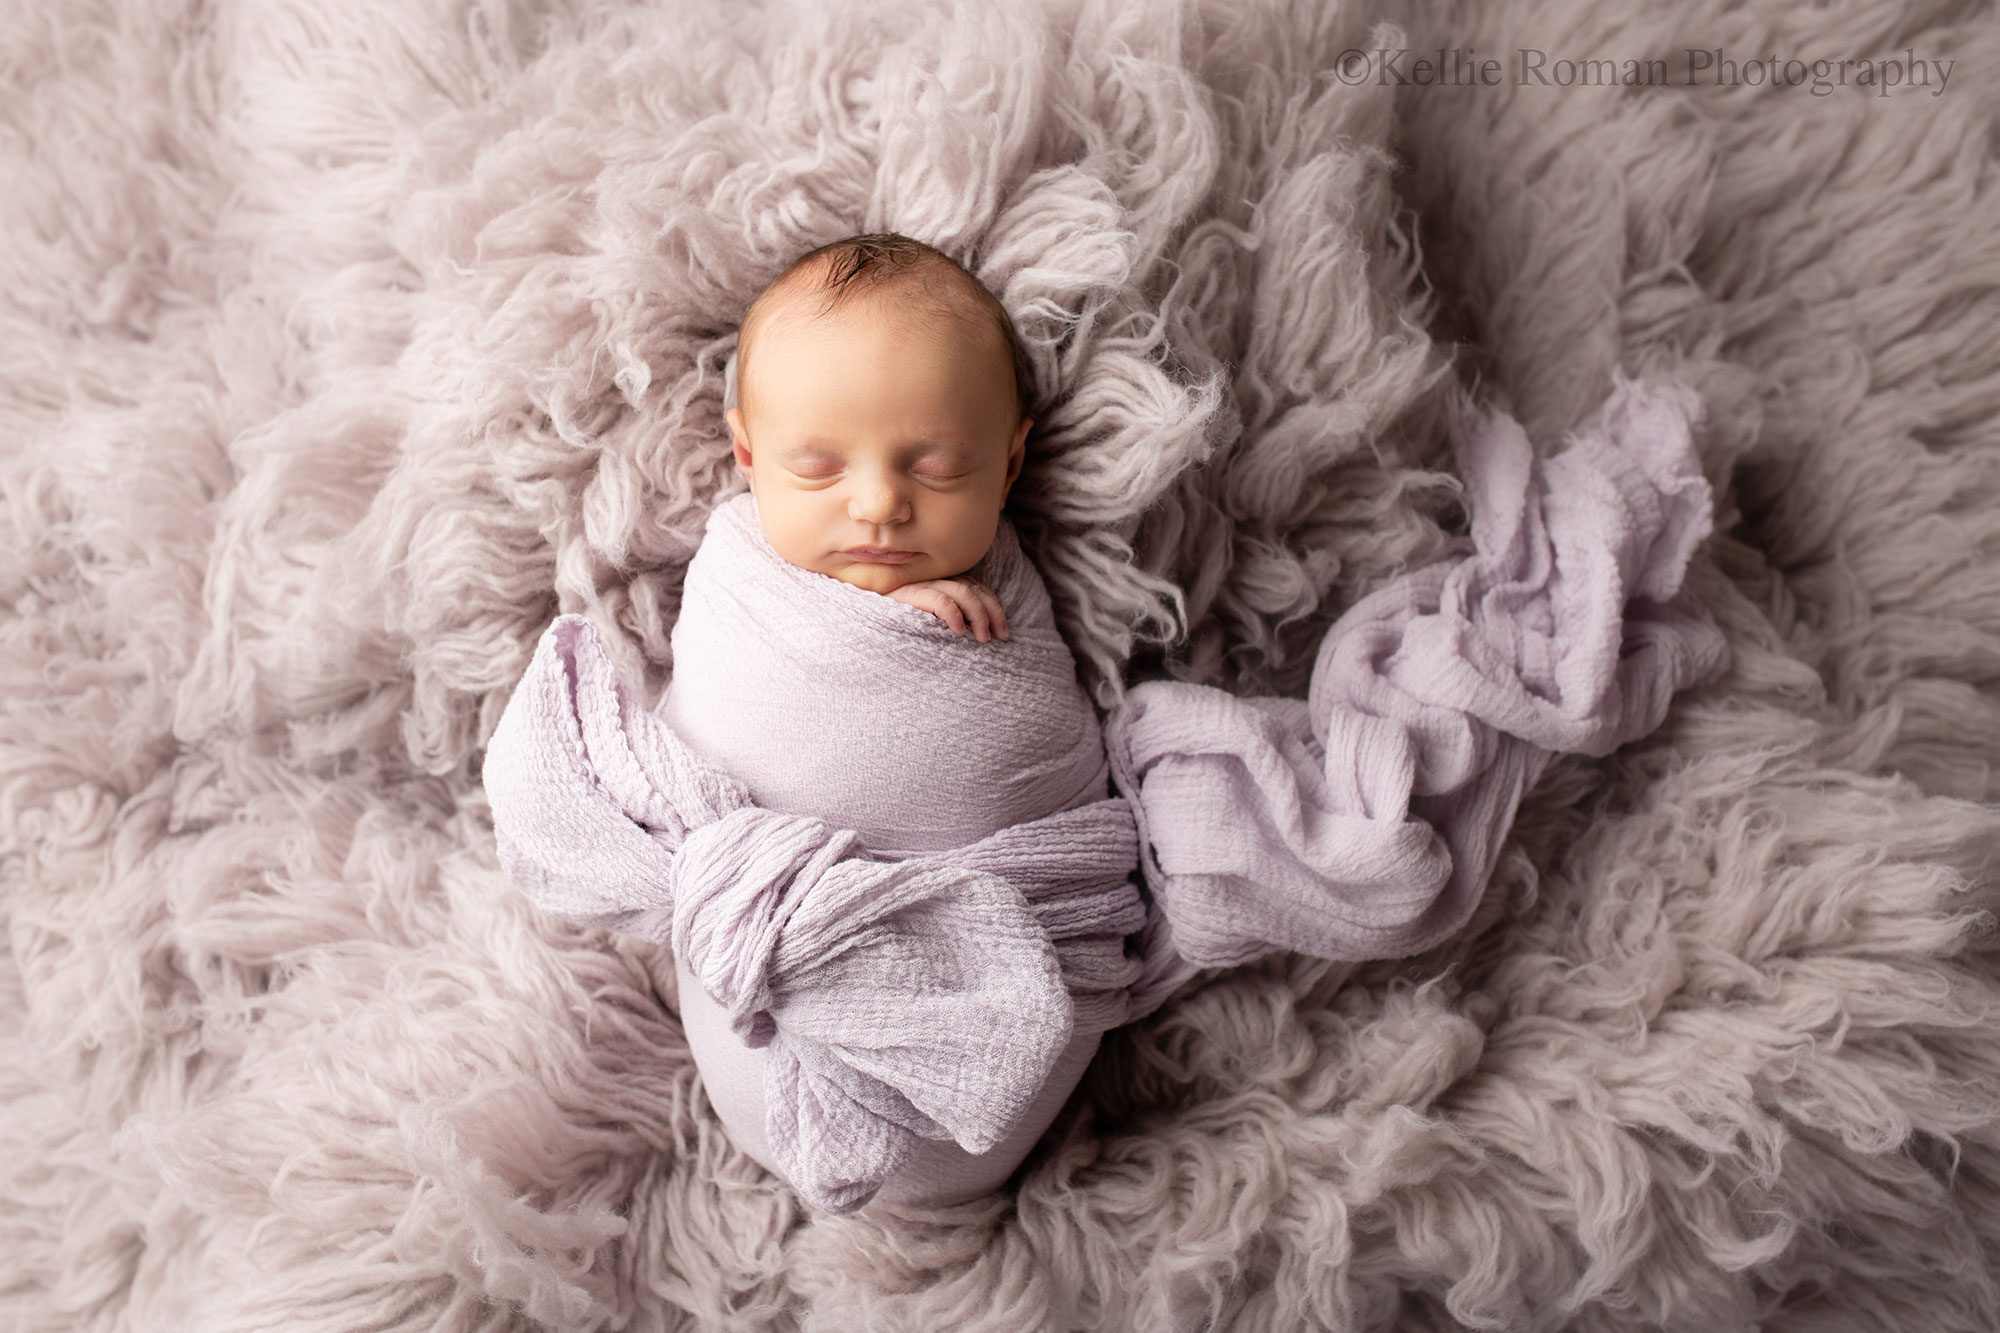 adorable newborn sister. newborn baby in a lavender swaddle that is tied in a bow is sleeping on her back on top of a lavender fluffy rug. she has one hand sticking out of the wrap.